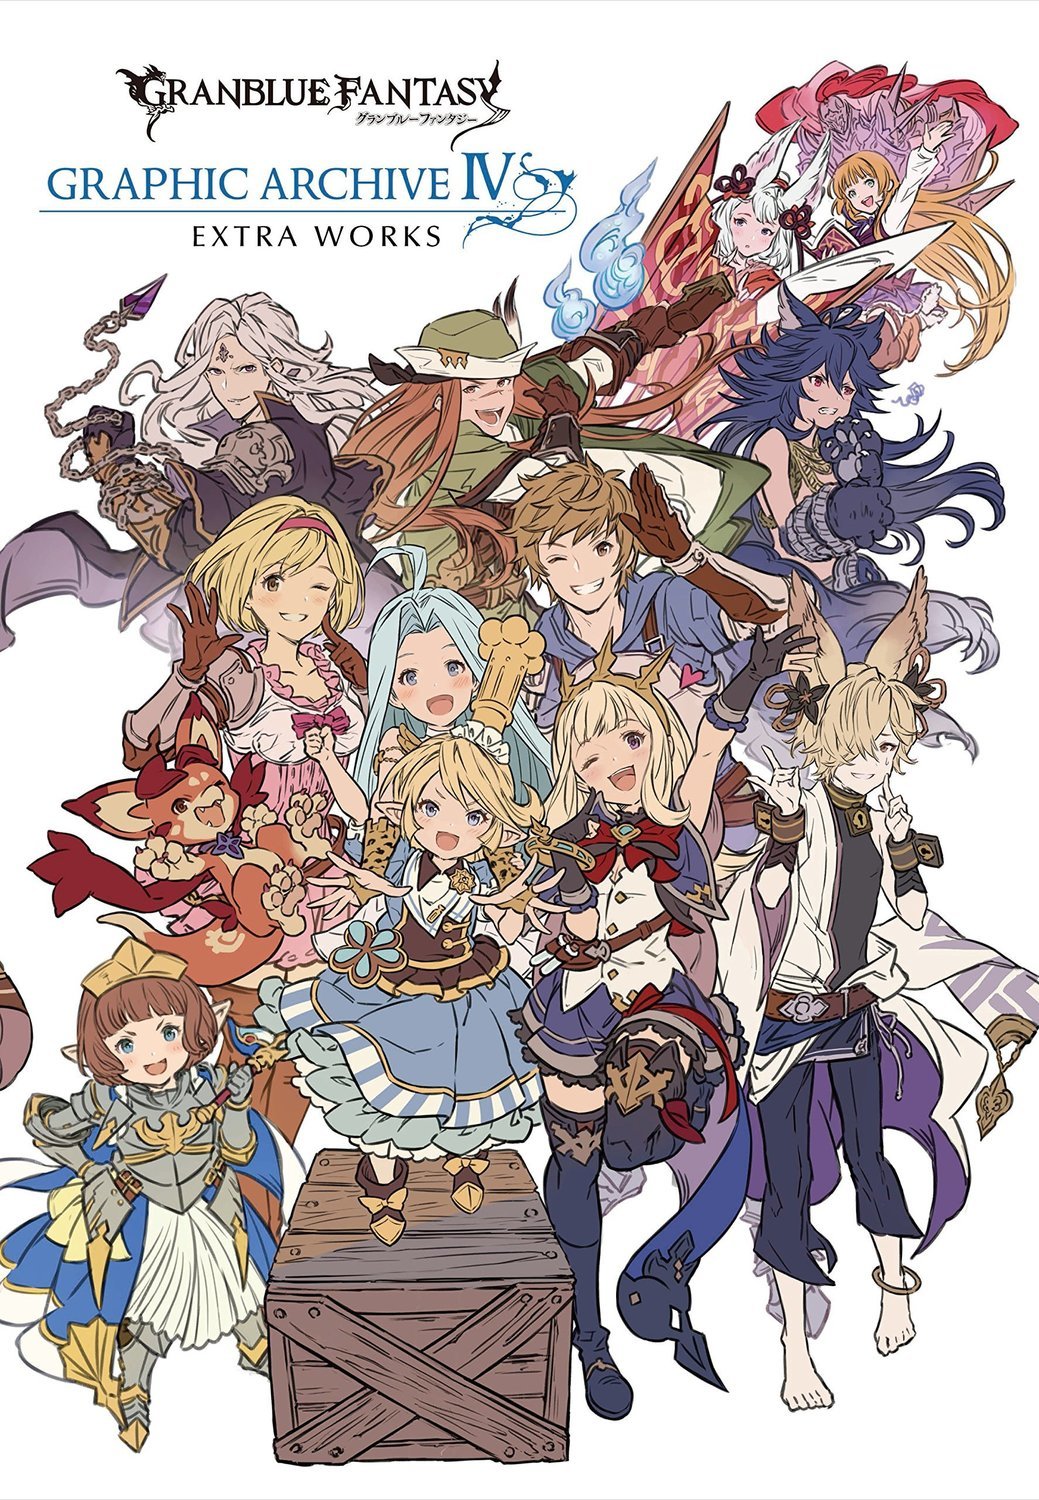 [Serial Code] GRANBLUE FANTASY GRAPHIC ARCHIVE IV EXTRA WORKS